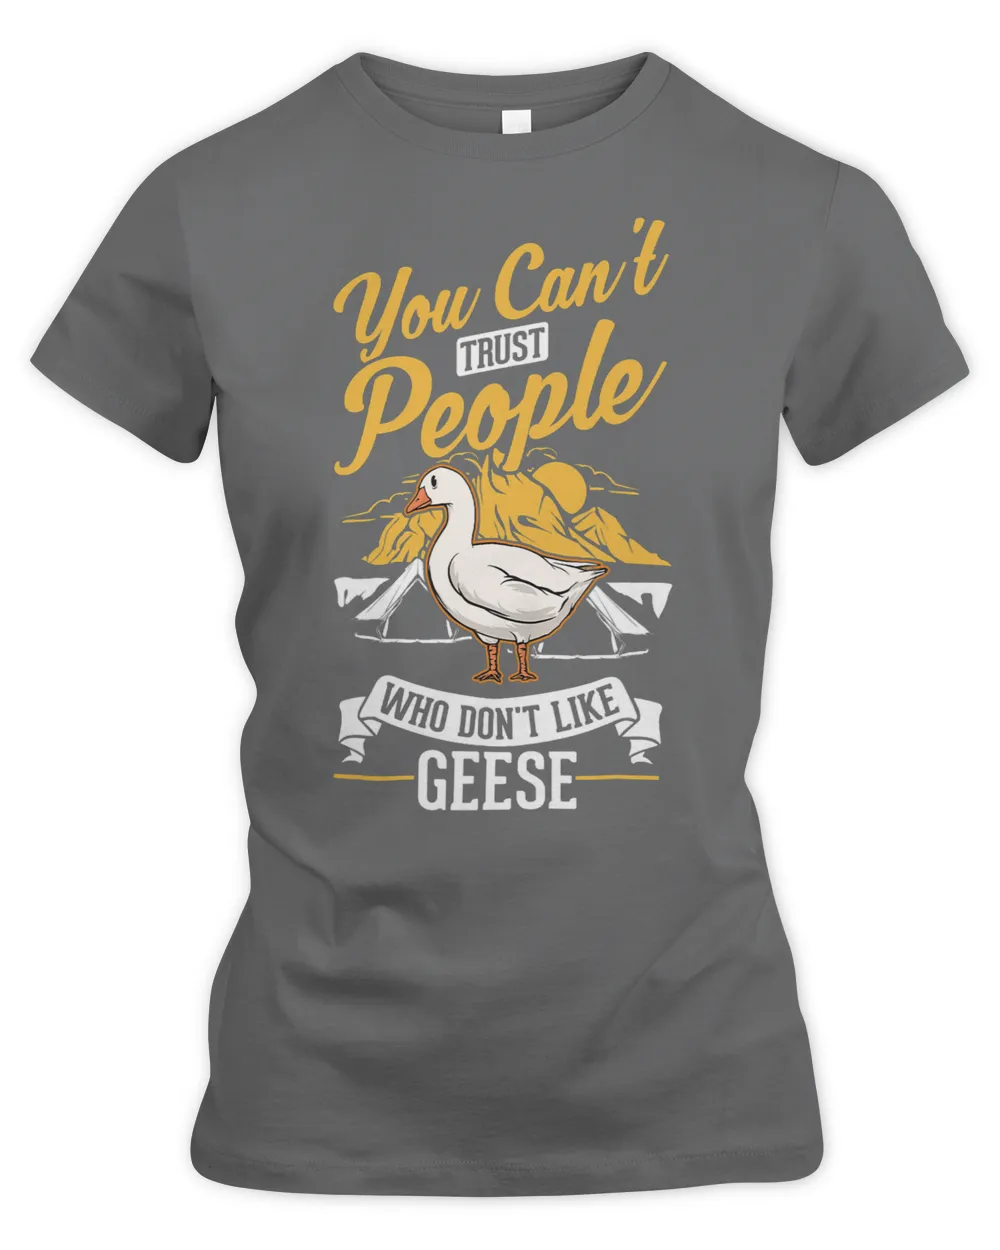 You cant trust people who dont like Geese